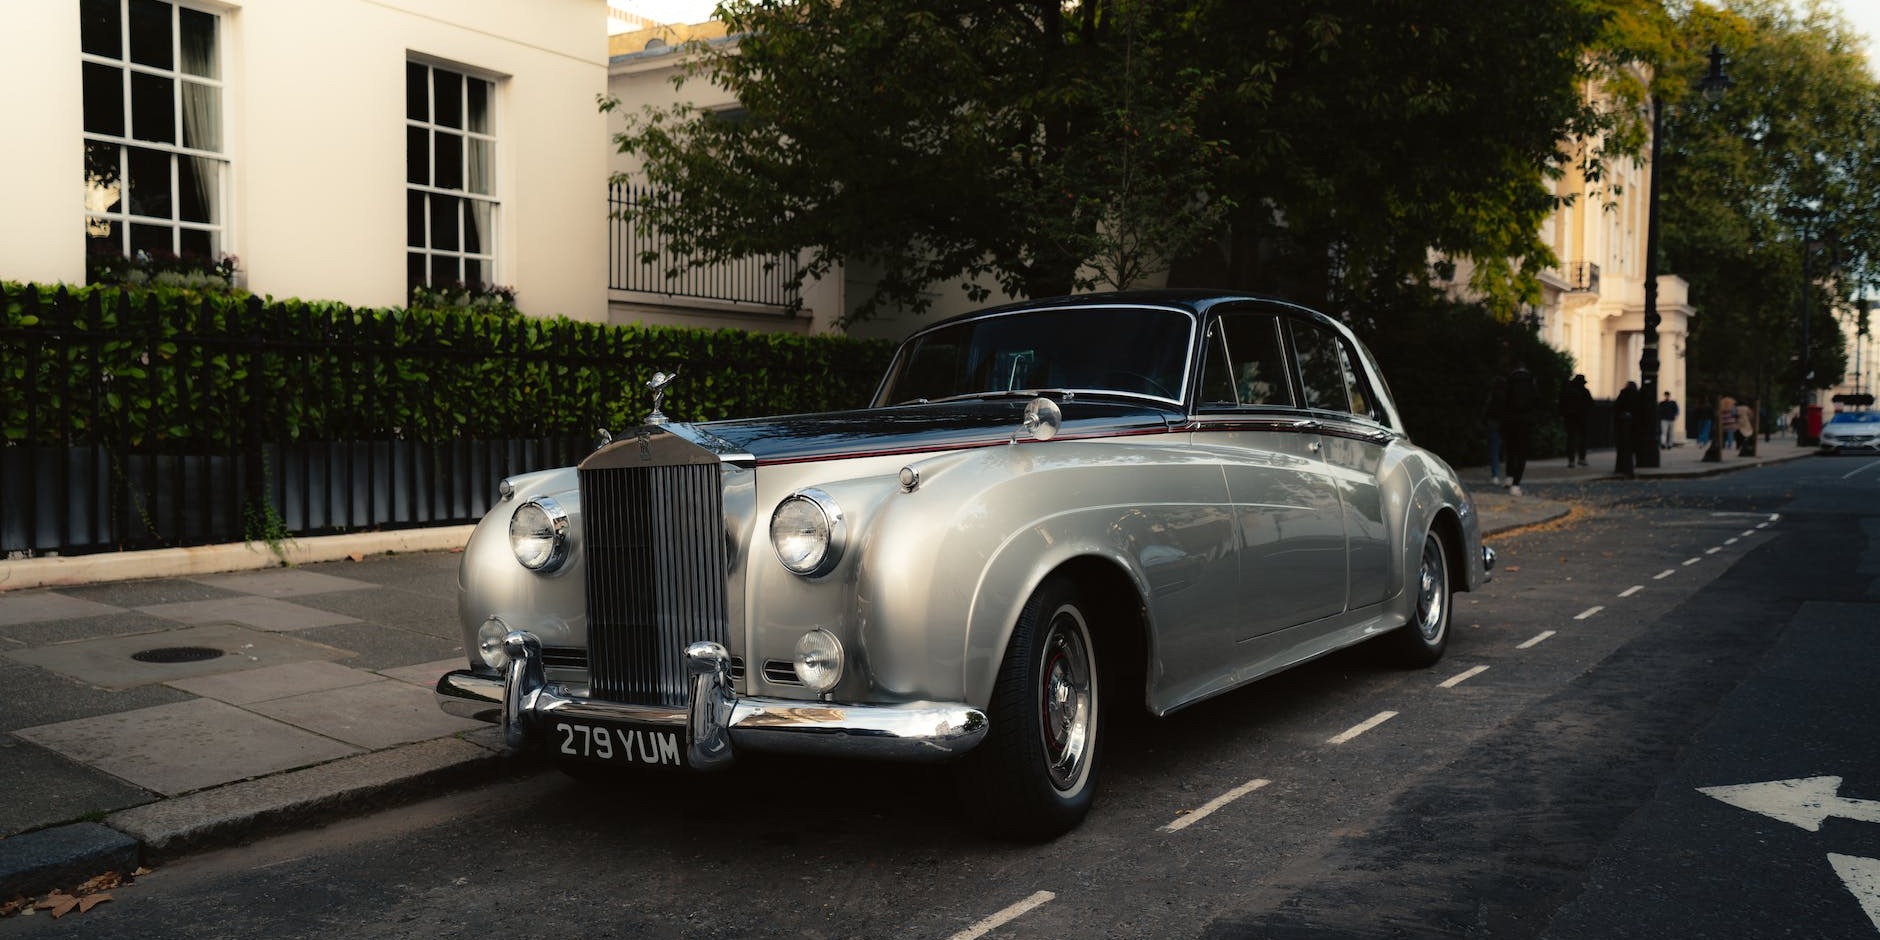 Why Vintage Cars Make the Best Prom Transport